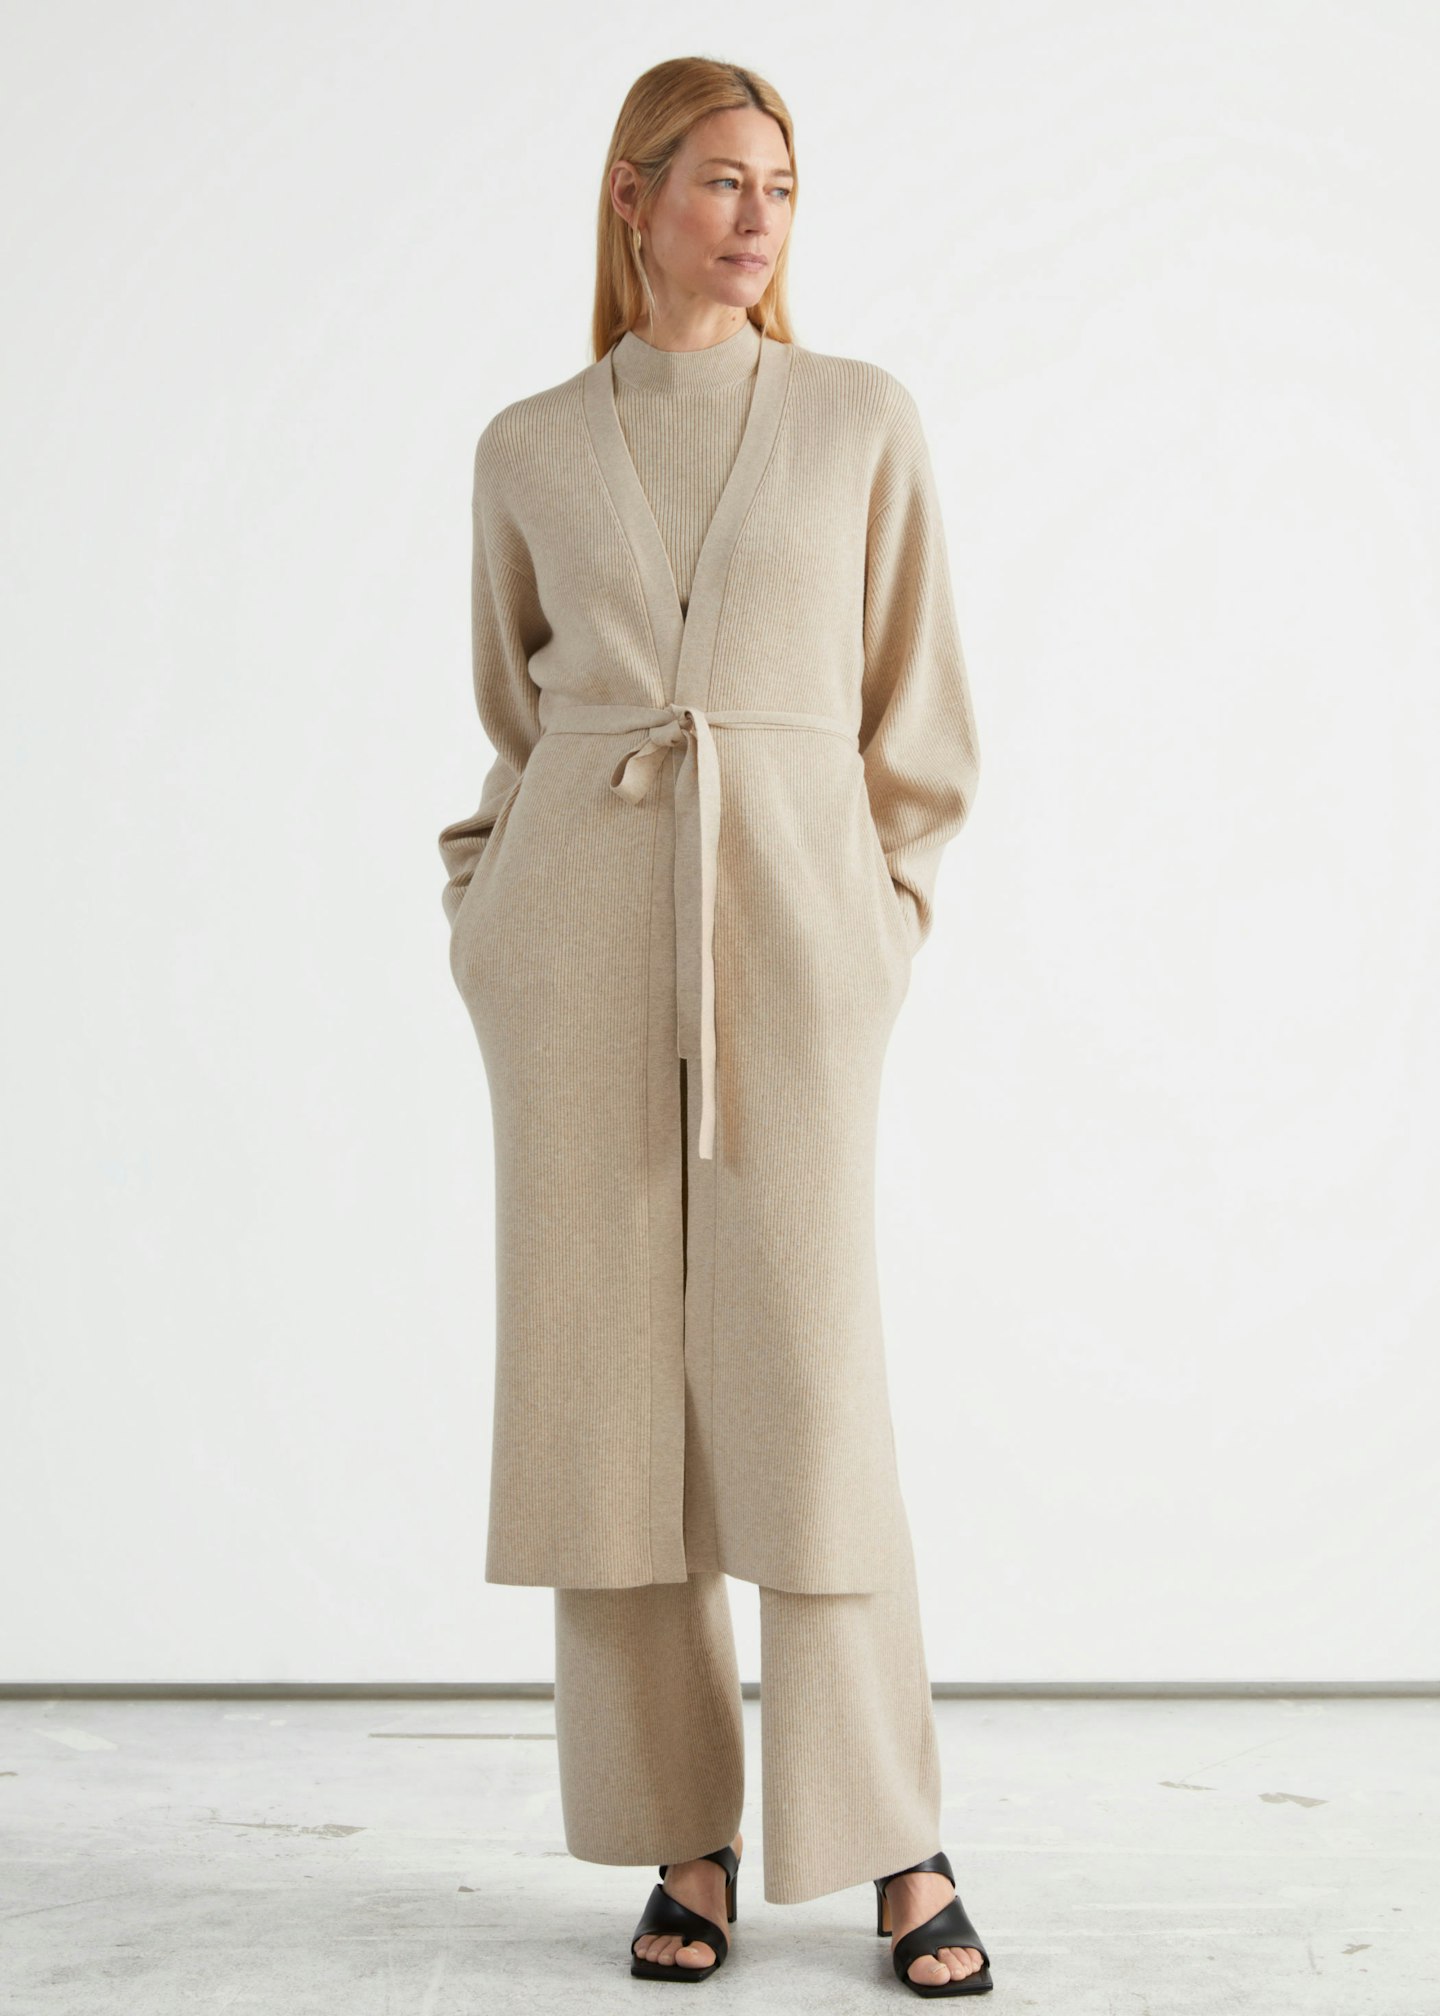 & Other Stories, Long Belted Knit Cardigan, £120